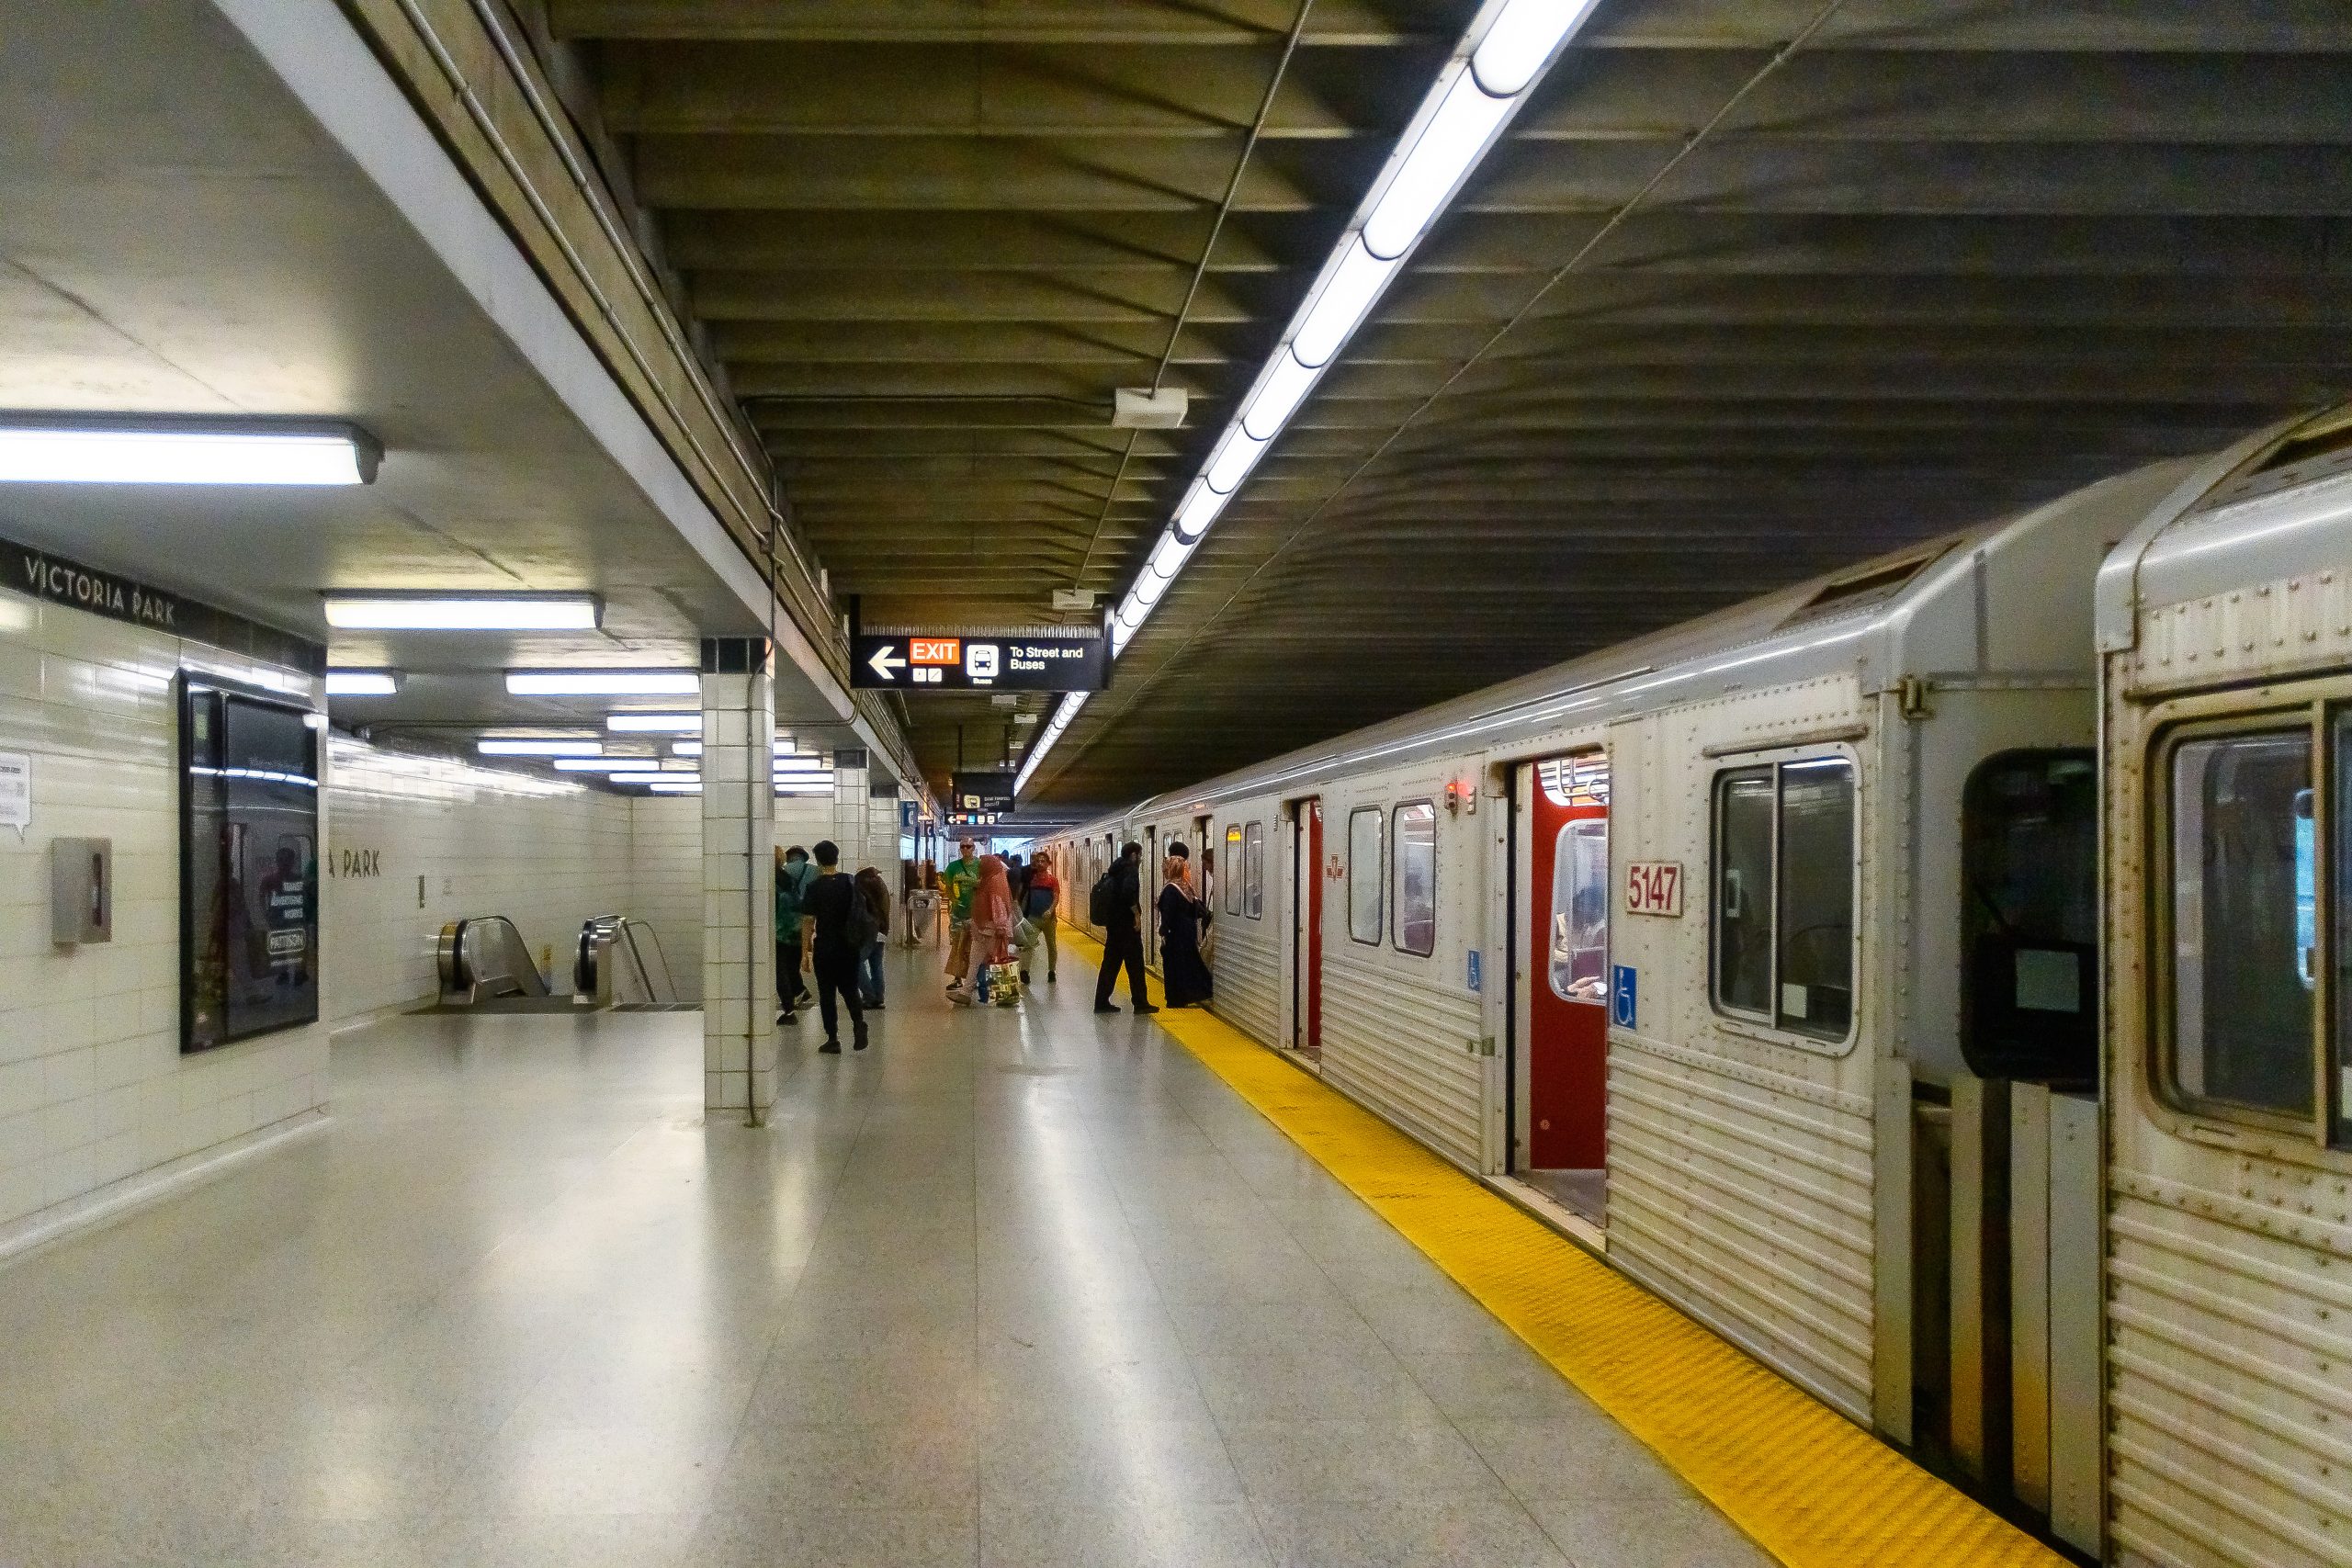 A Toronto subway train opens its door at a station. From a distance, passengers are seen exiting and embarking the train.